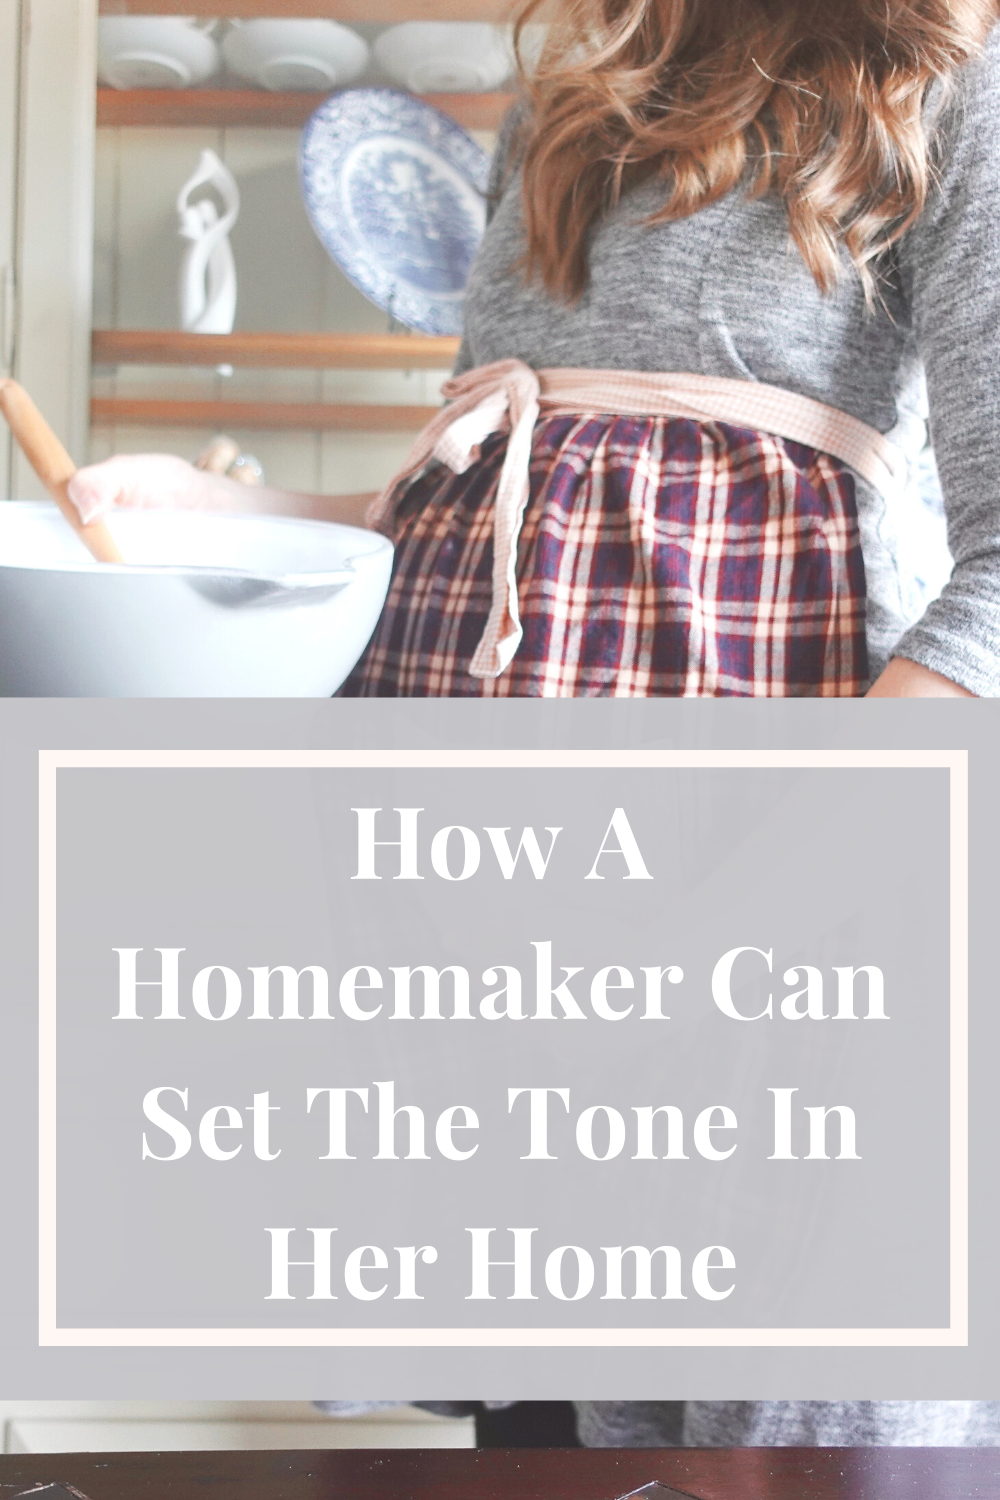 Ways A Homemaker Sets The Tone In Her Home Pinterest Pin